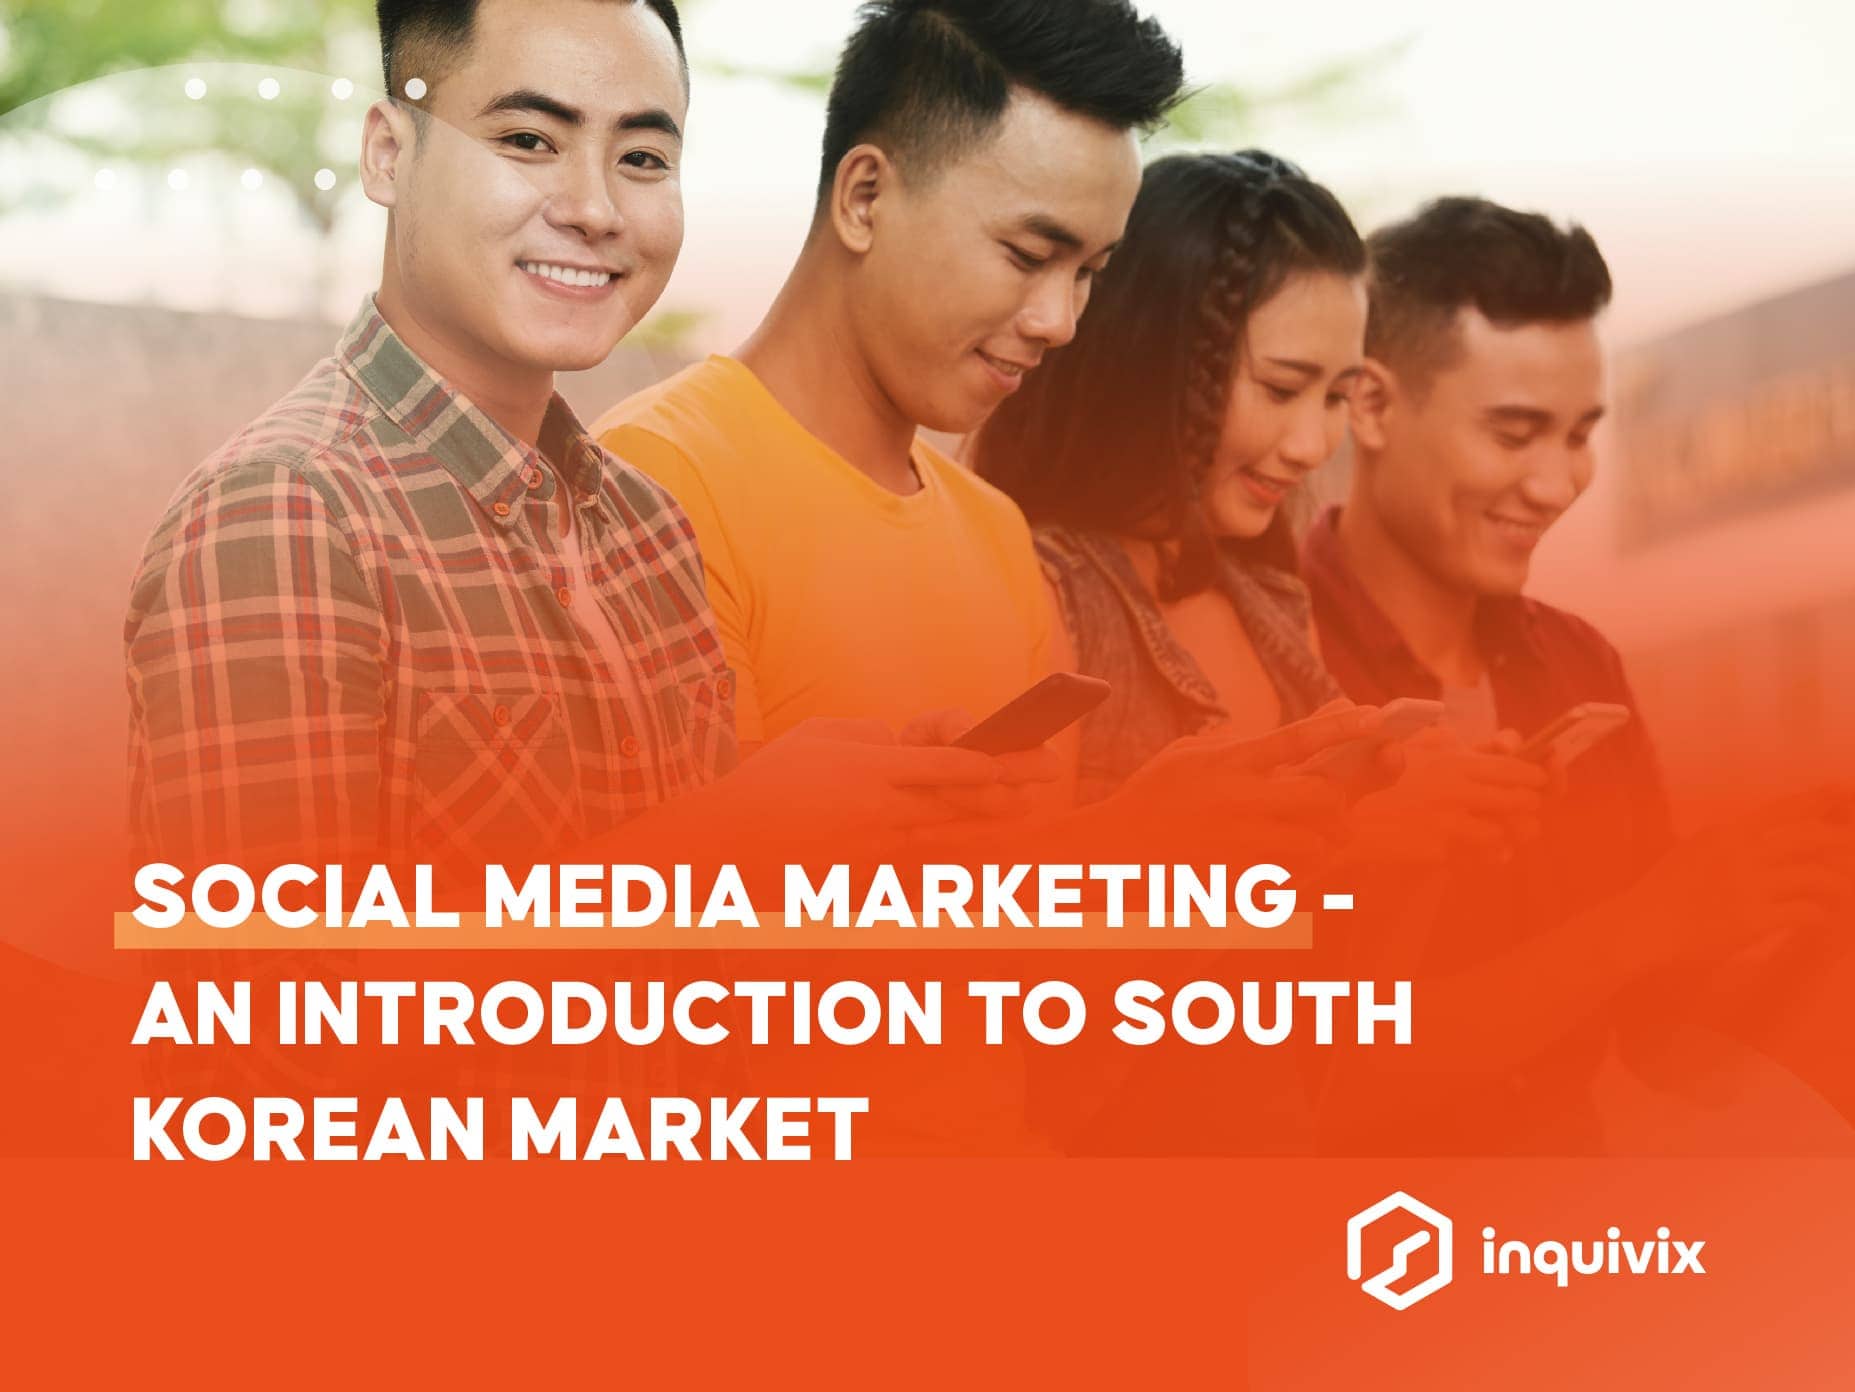 social media marketing an introduction to iSouth Korean market